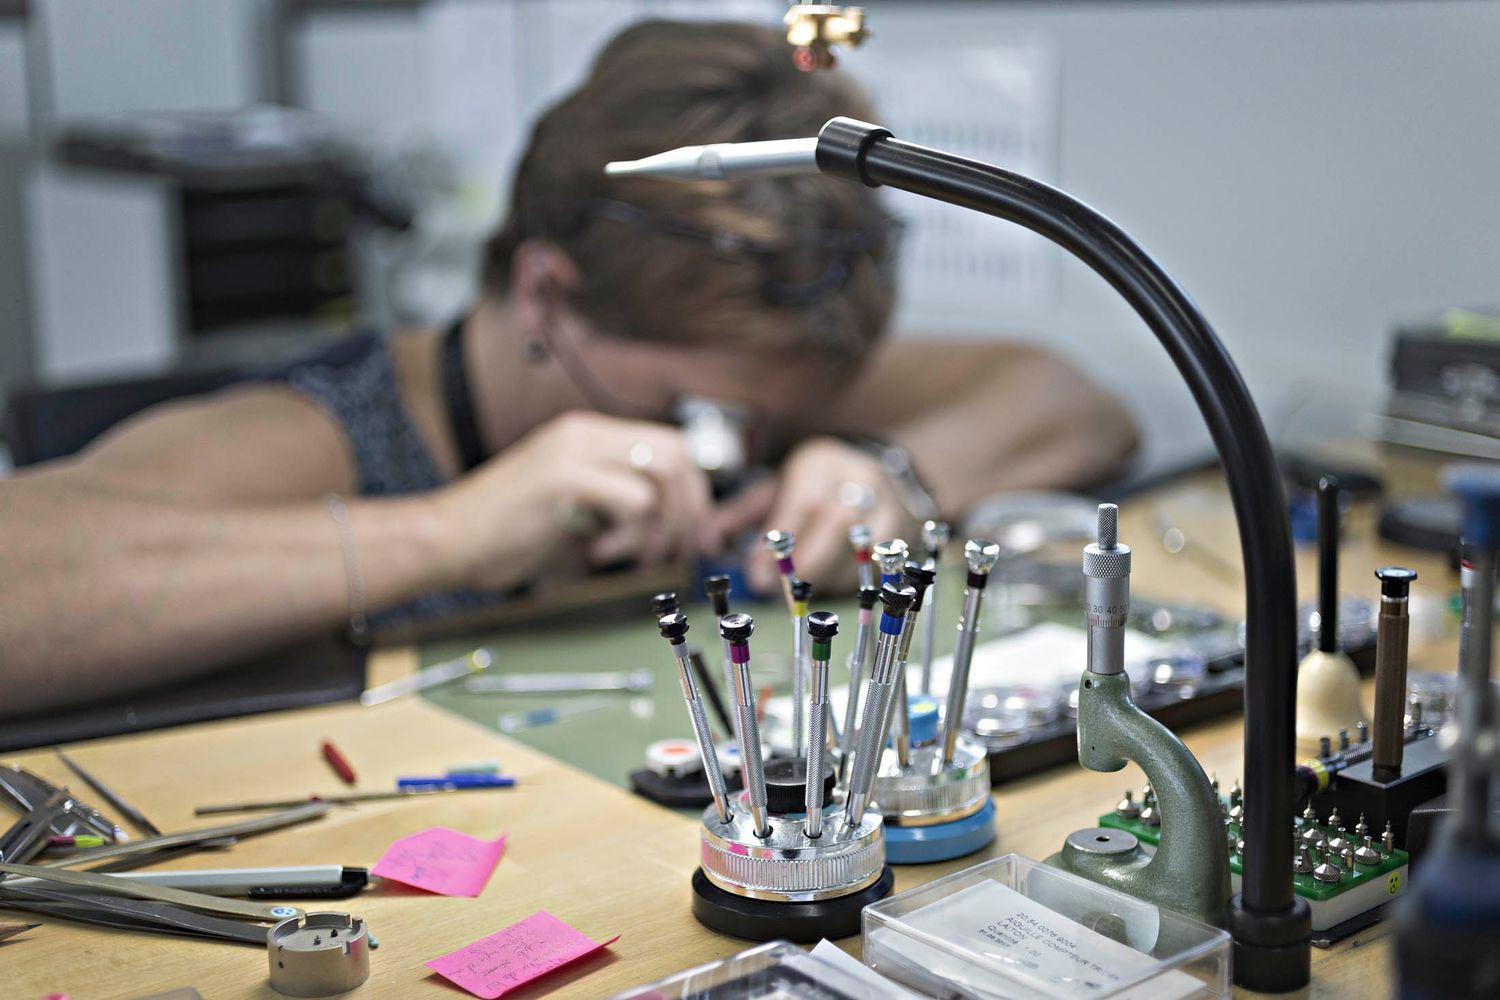 An employee uses a loupe to inspect the mechanism of a wristwatch. The tools in the foreground are what she uses to pick up or to manipulate the almost-microscopic components.